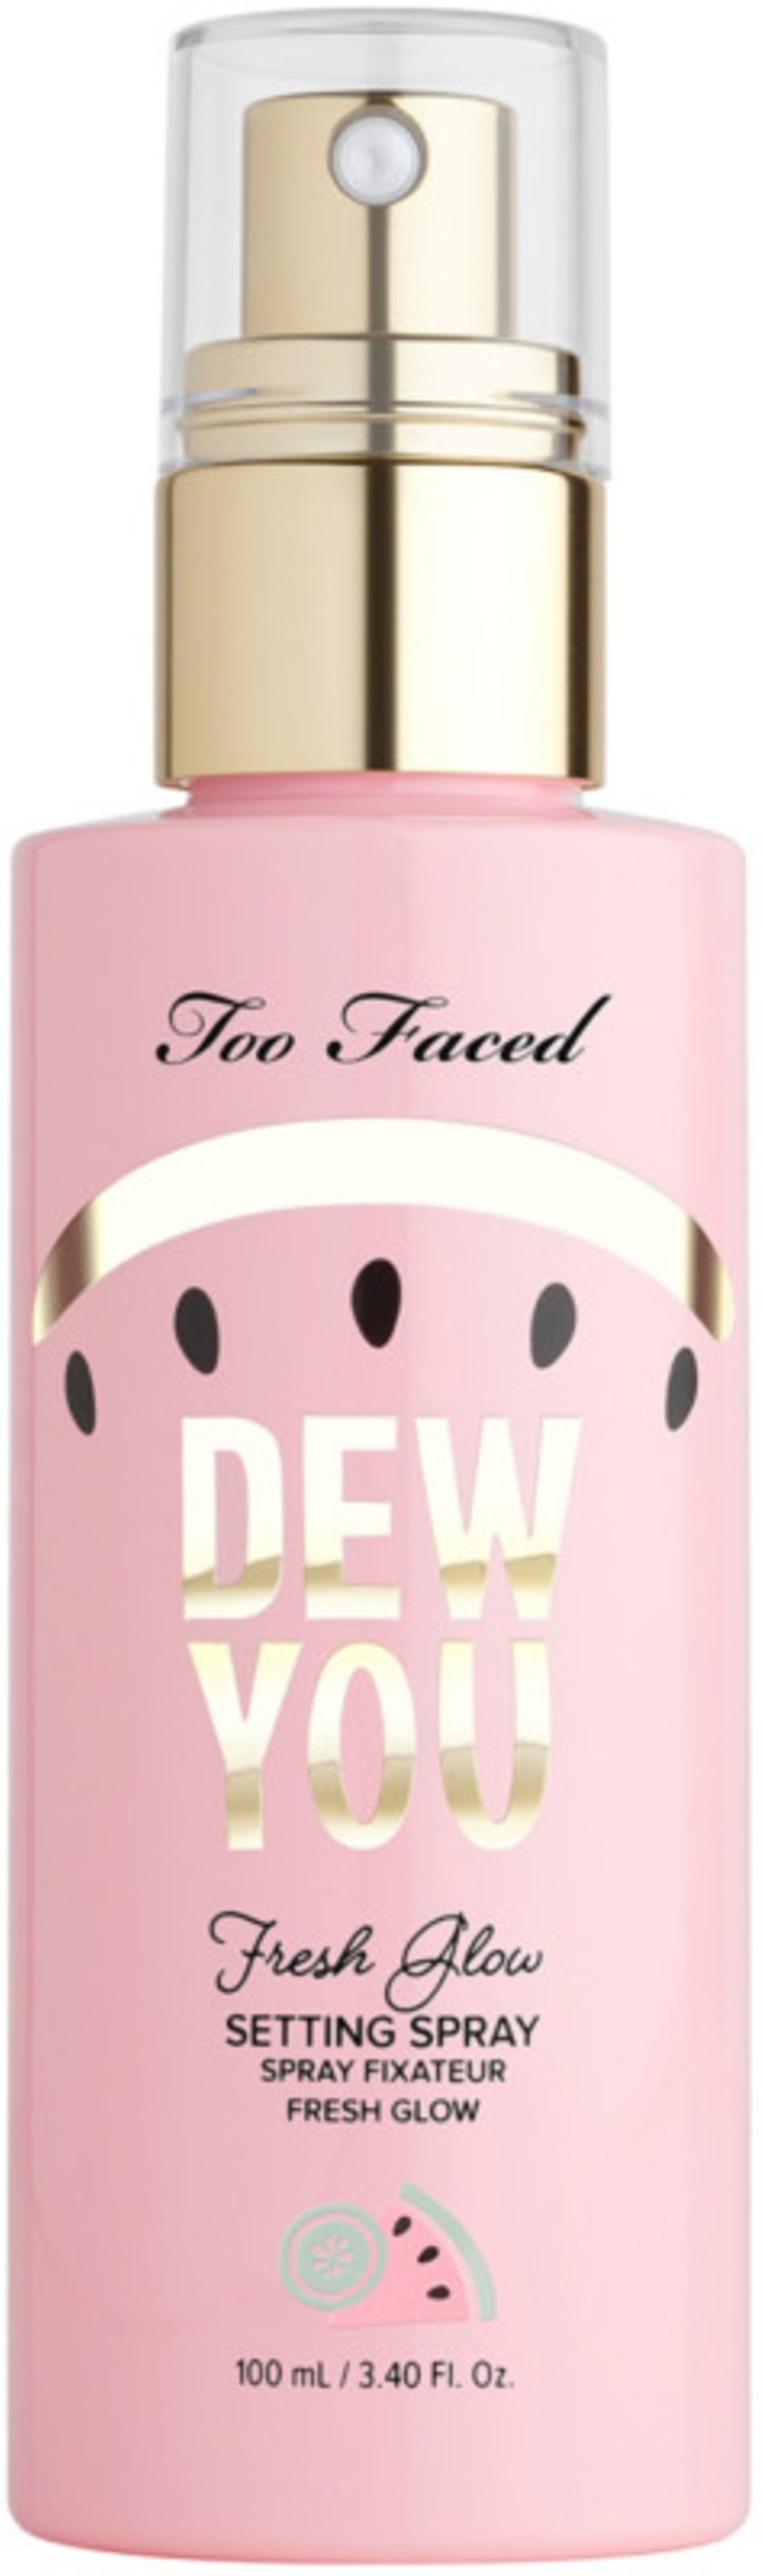 Too Faces Dew You Settingspray